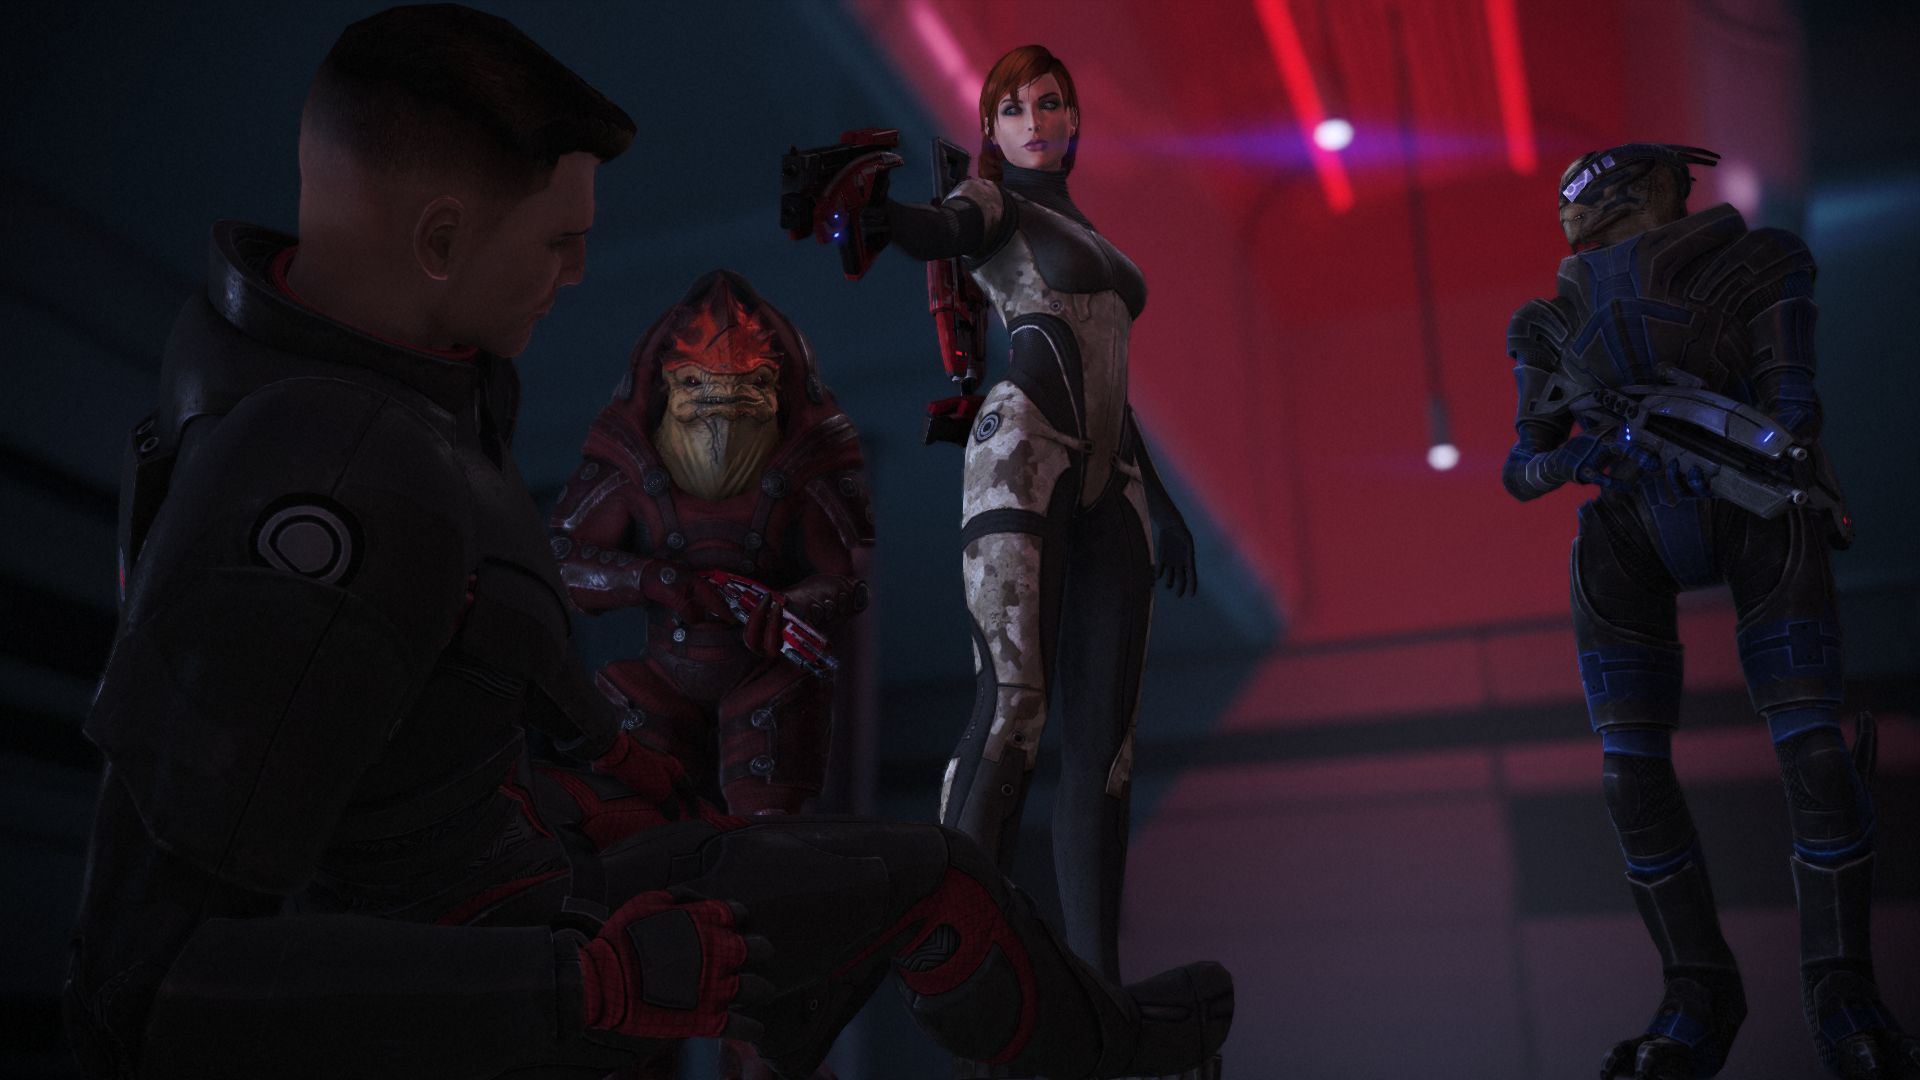 Mass Effect: Legendary Edition (for PC) Review